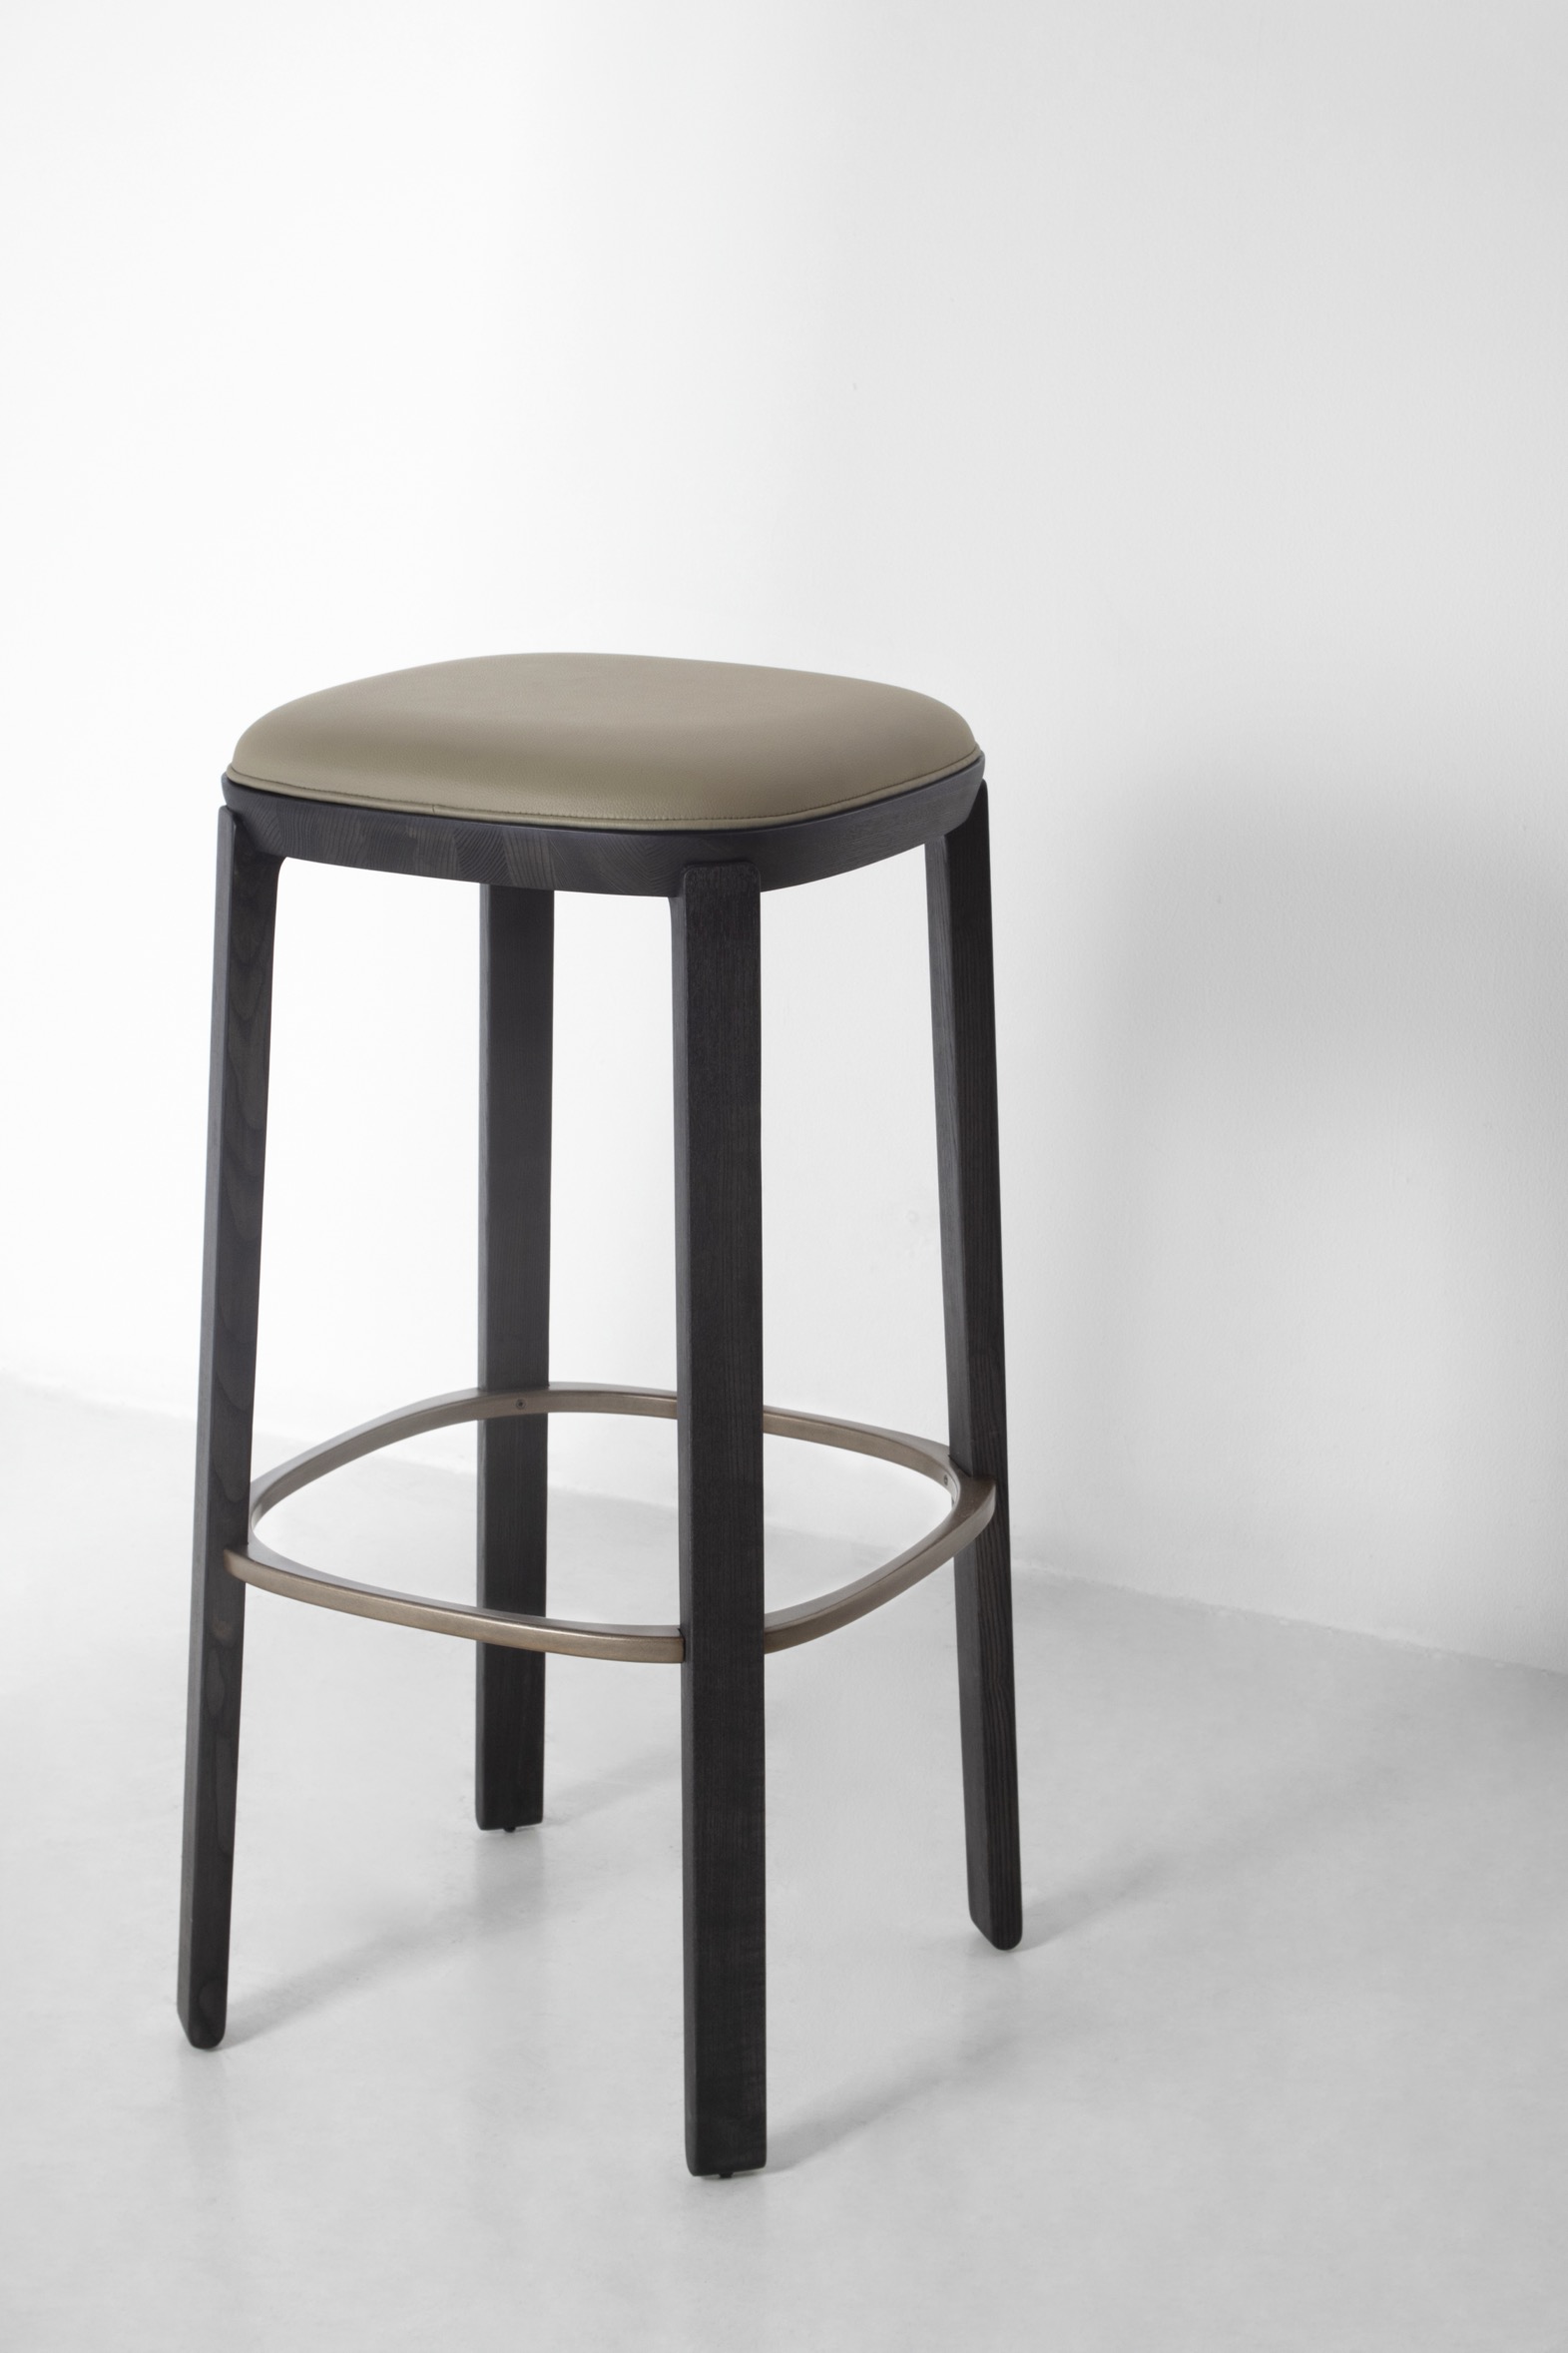 Collette Bar Stool With Cushion